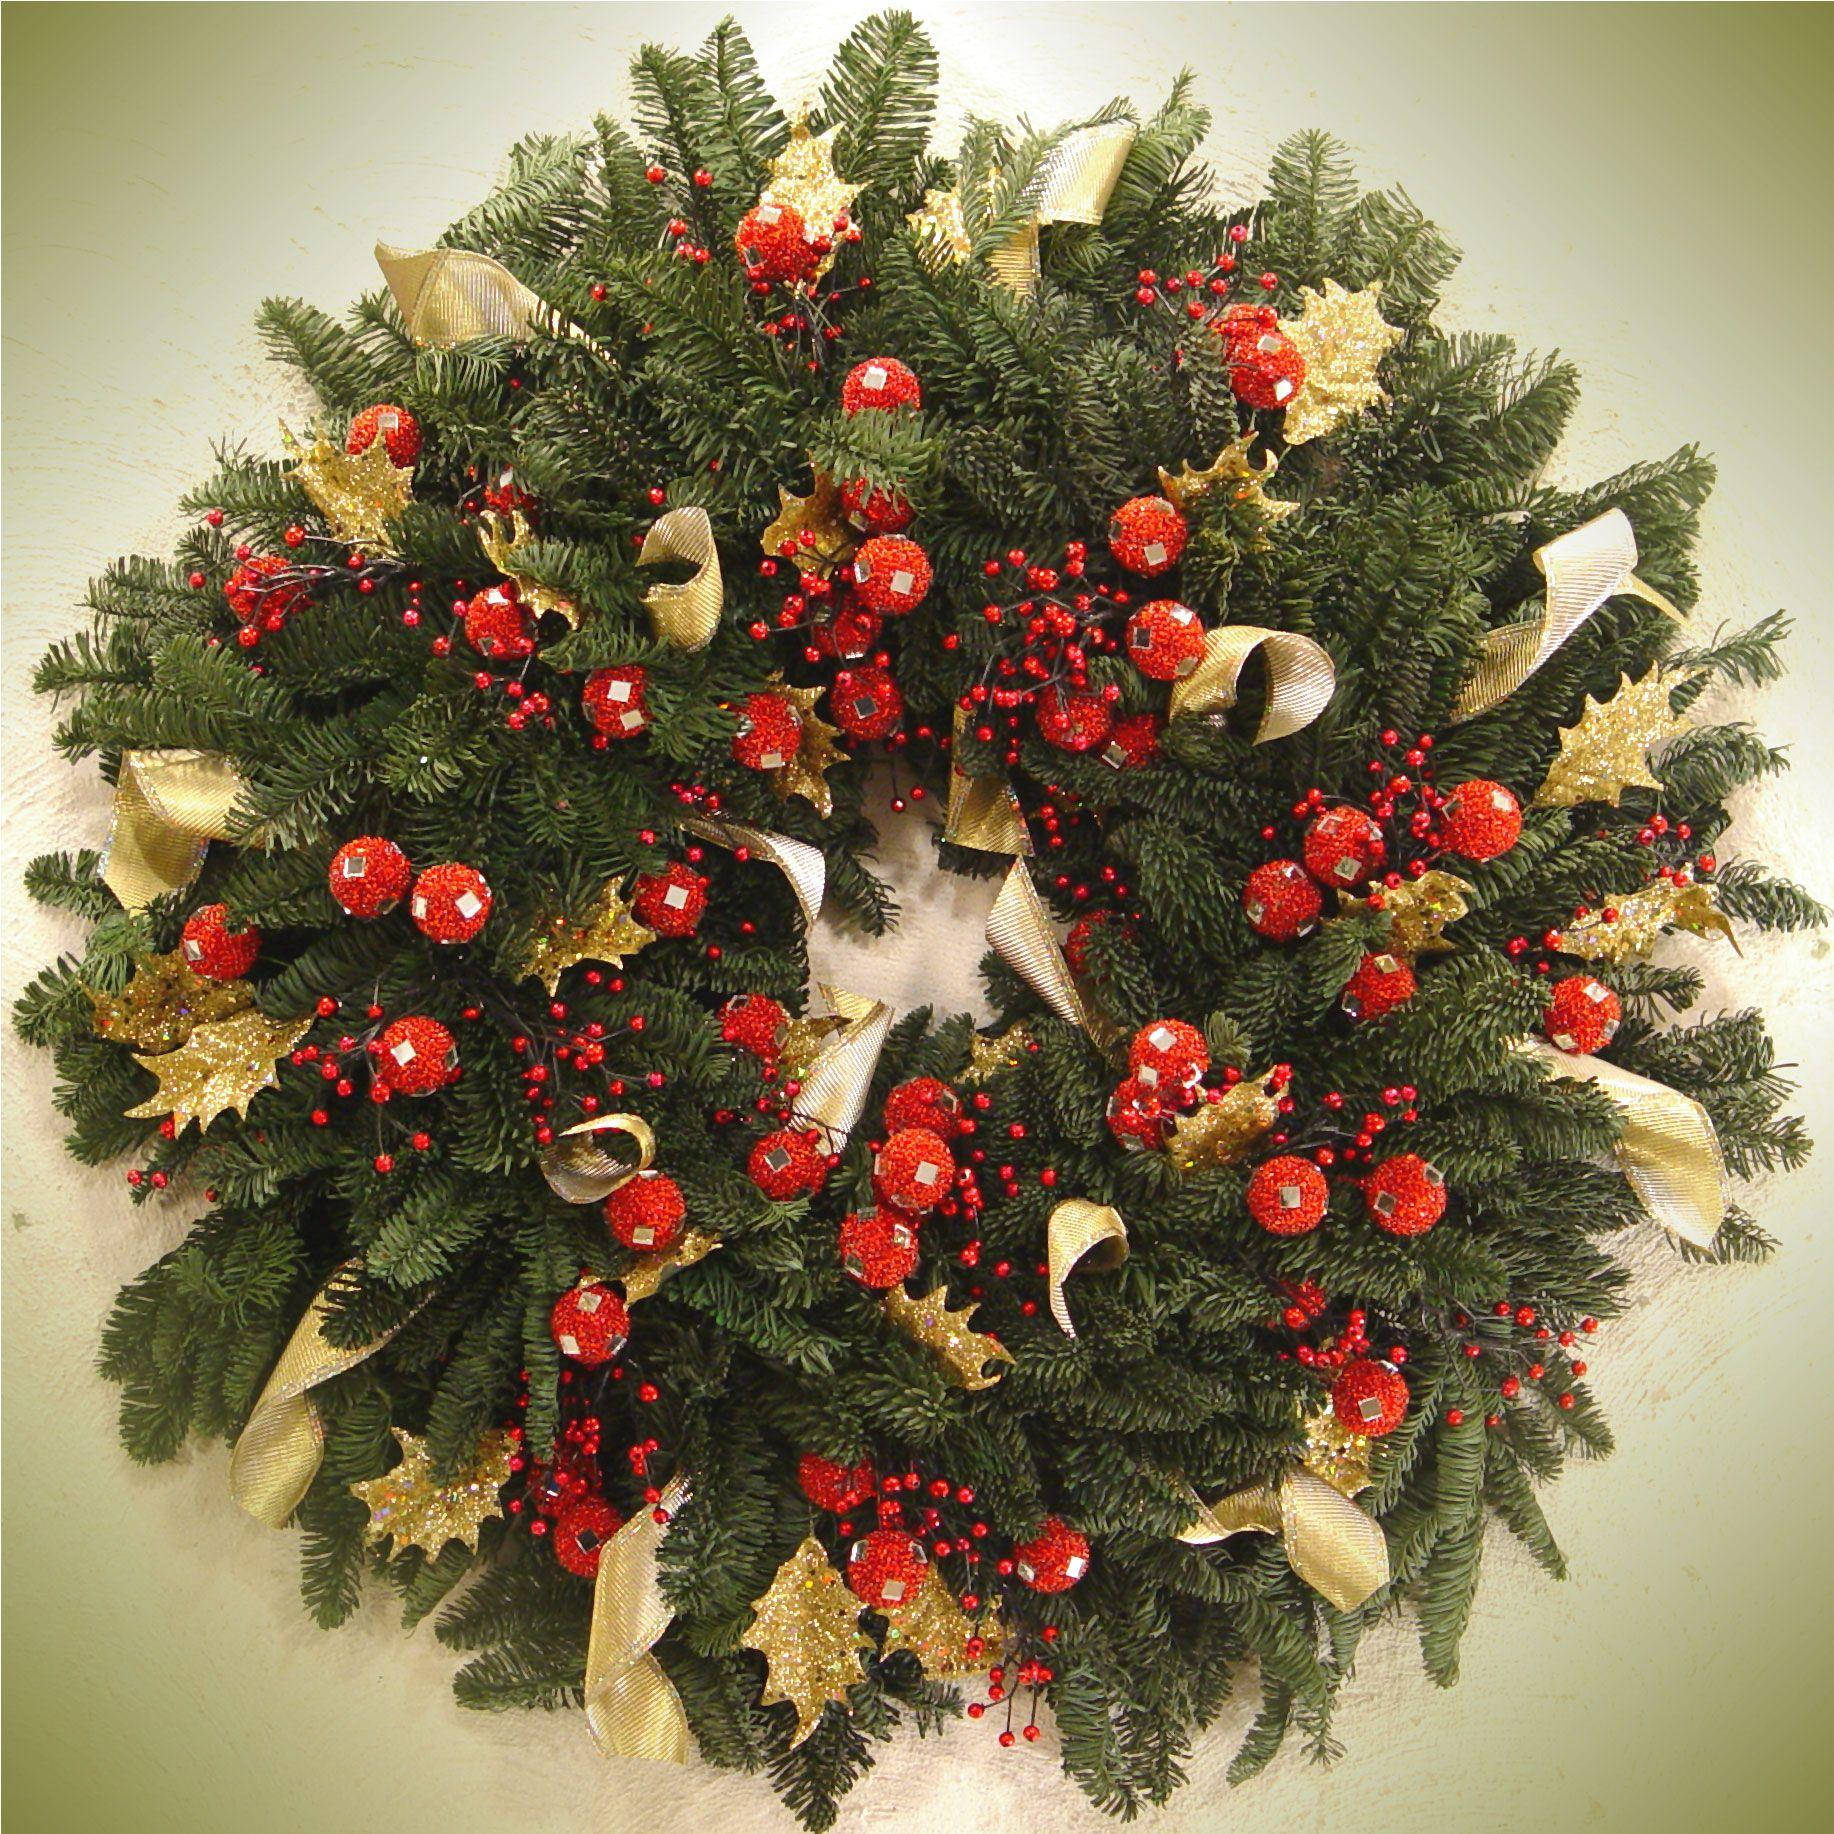 Captivating Christmas Wreath Adorned With Gold Ribbons